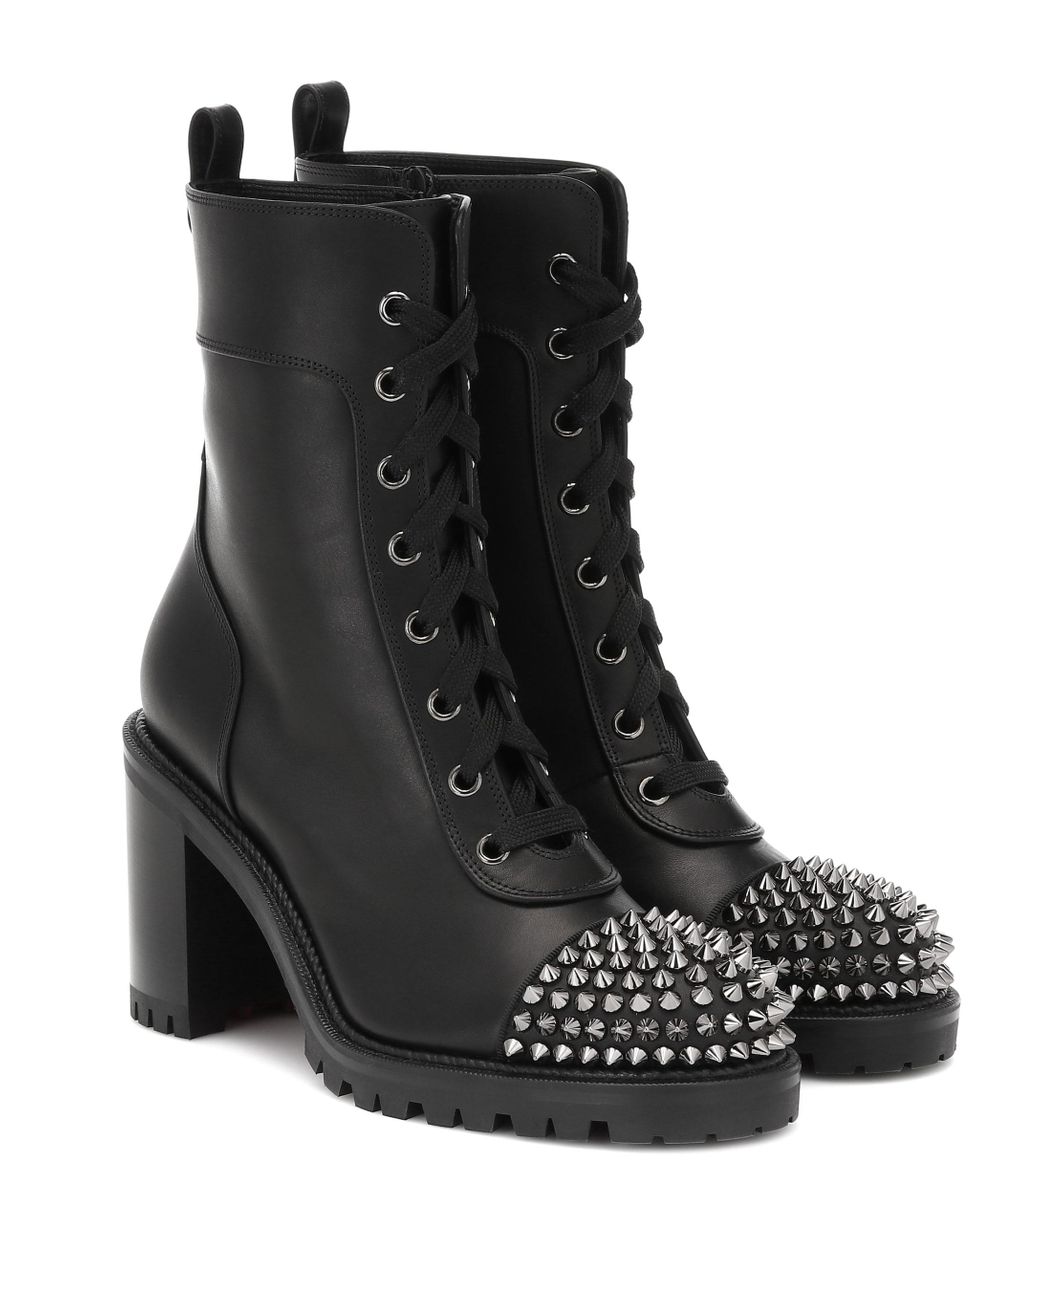 Christian Louboutin Ts Croc 70 Spiked Leather Ankle Boots in Black | Lyst